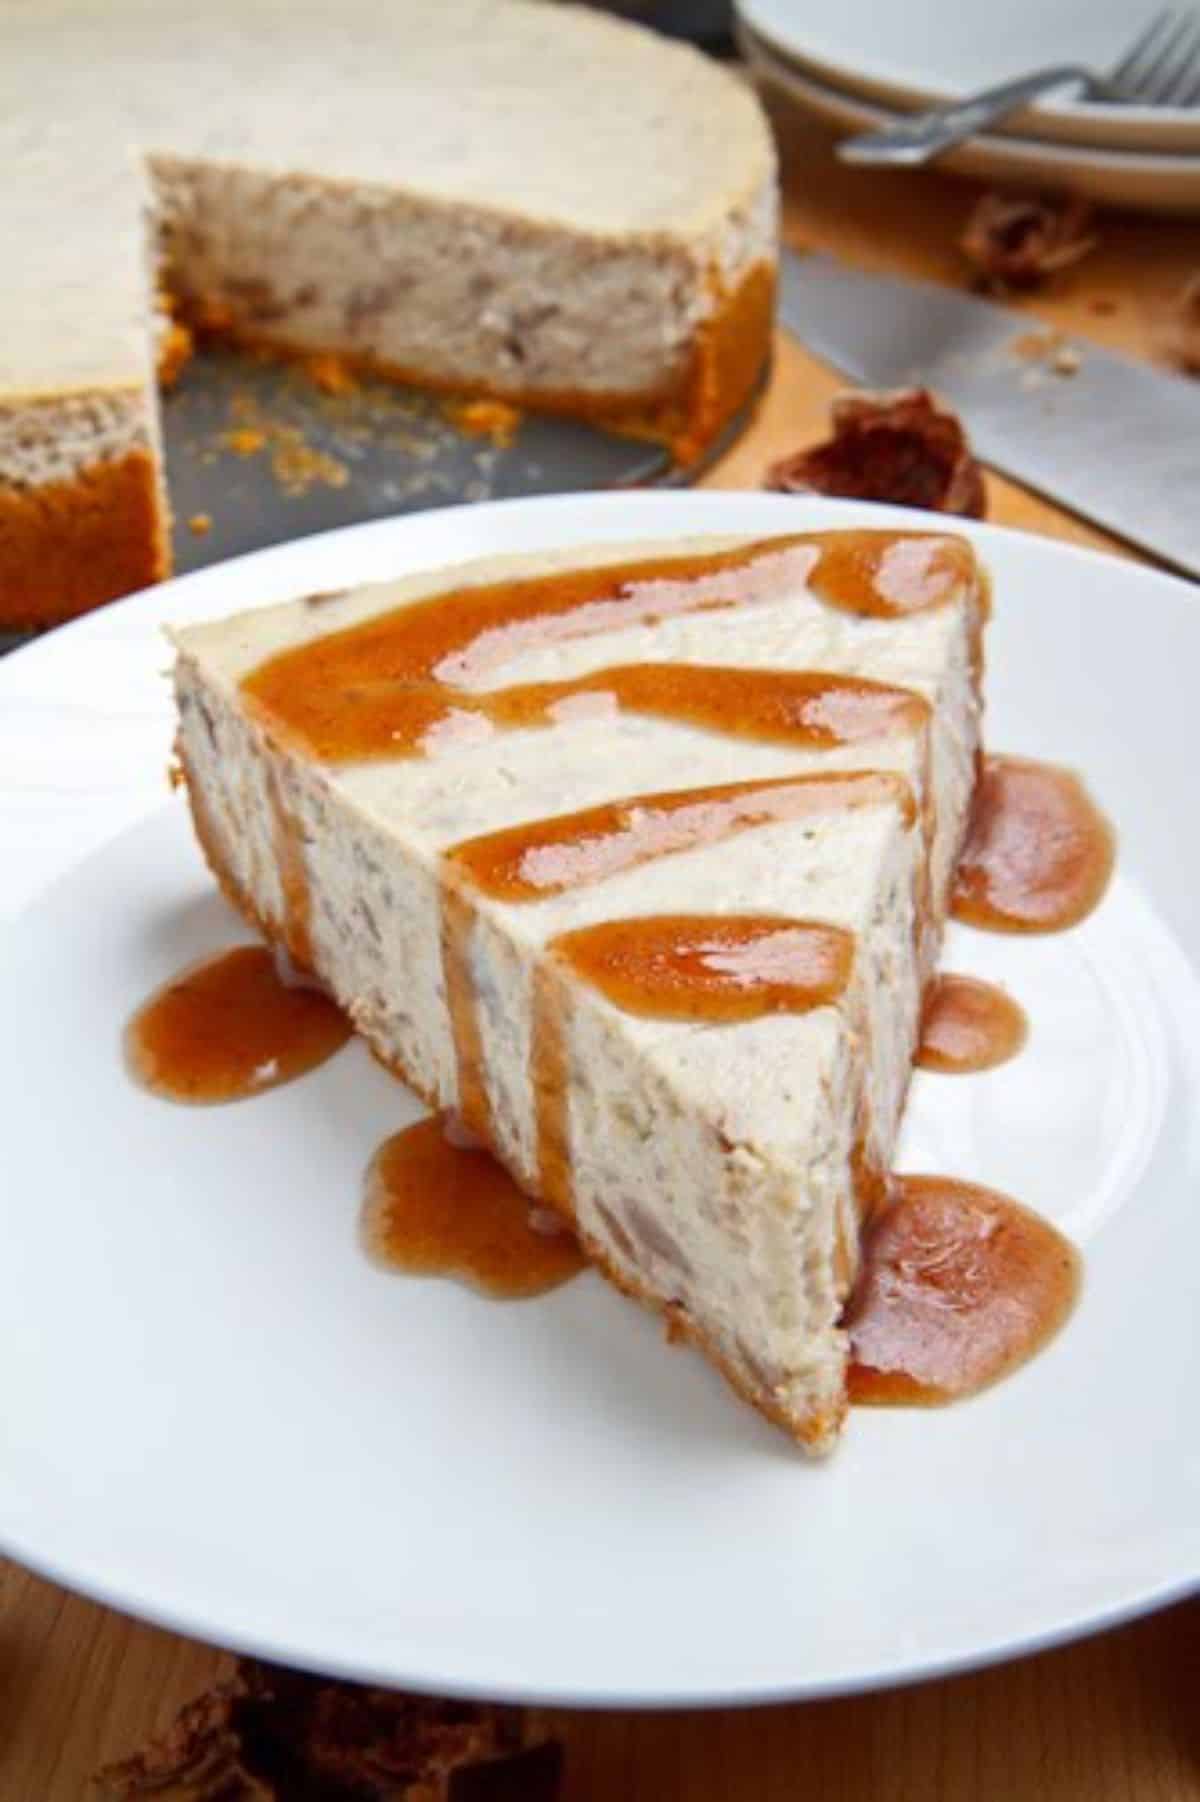 A piece of chestnut cheesecakeon a white plate.